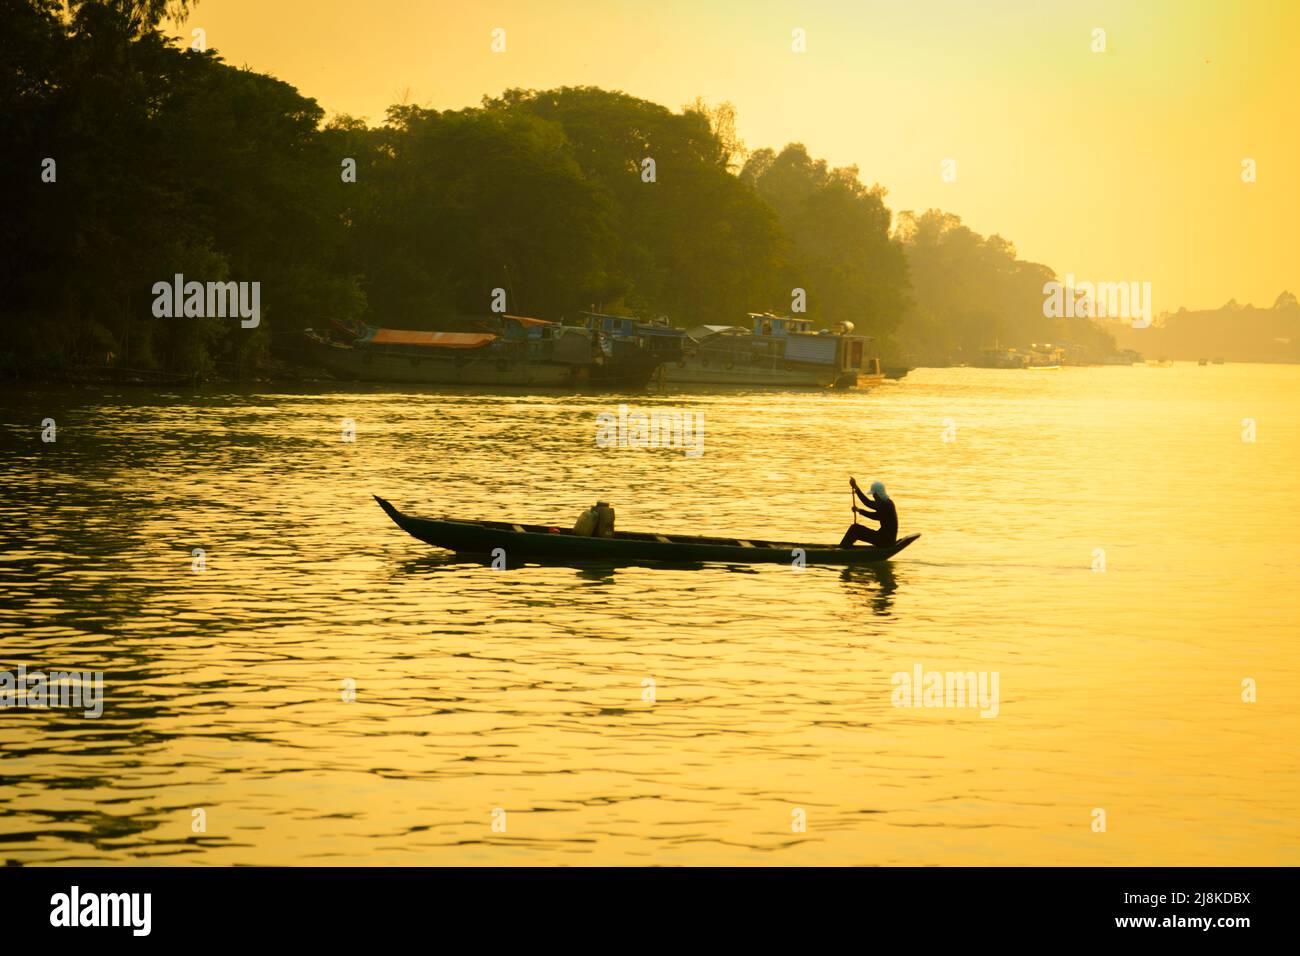 On the Mekong River between Cambodia and Vietnam with a small wood boat and one person in silhouette. Stock Photo